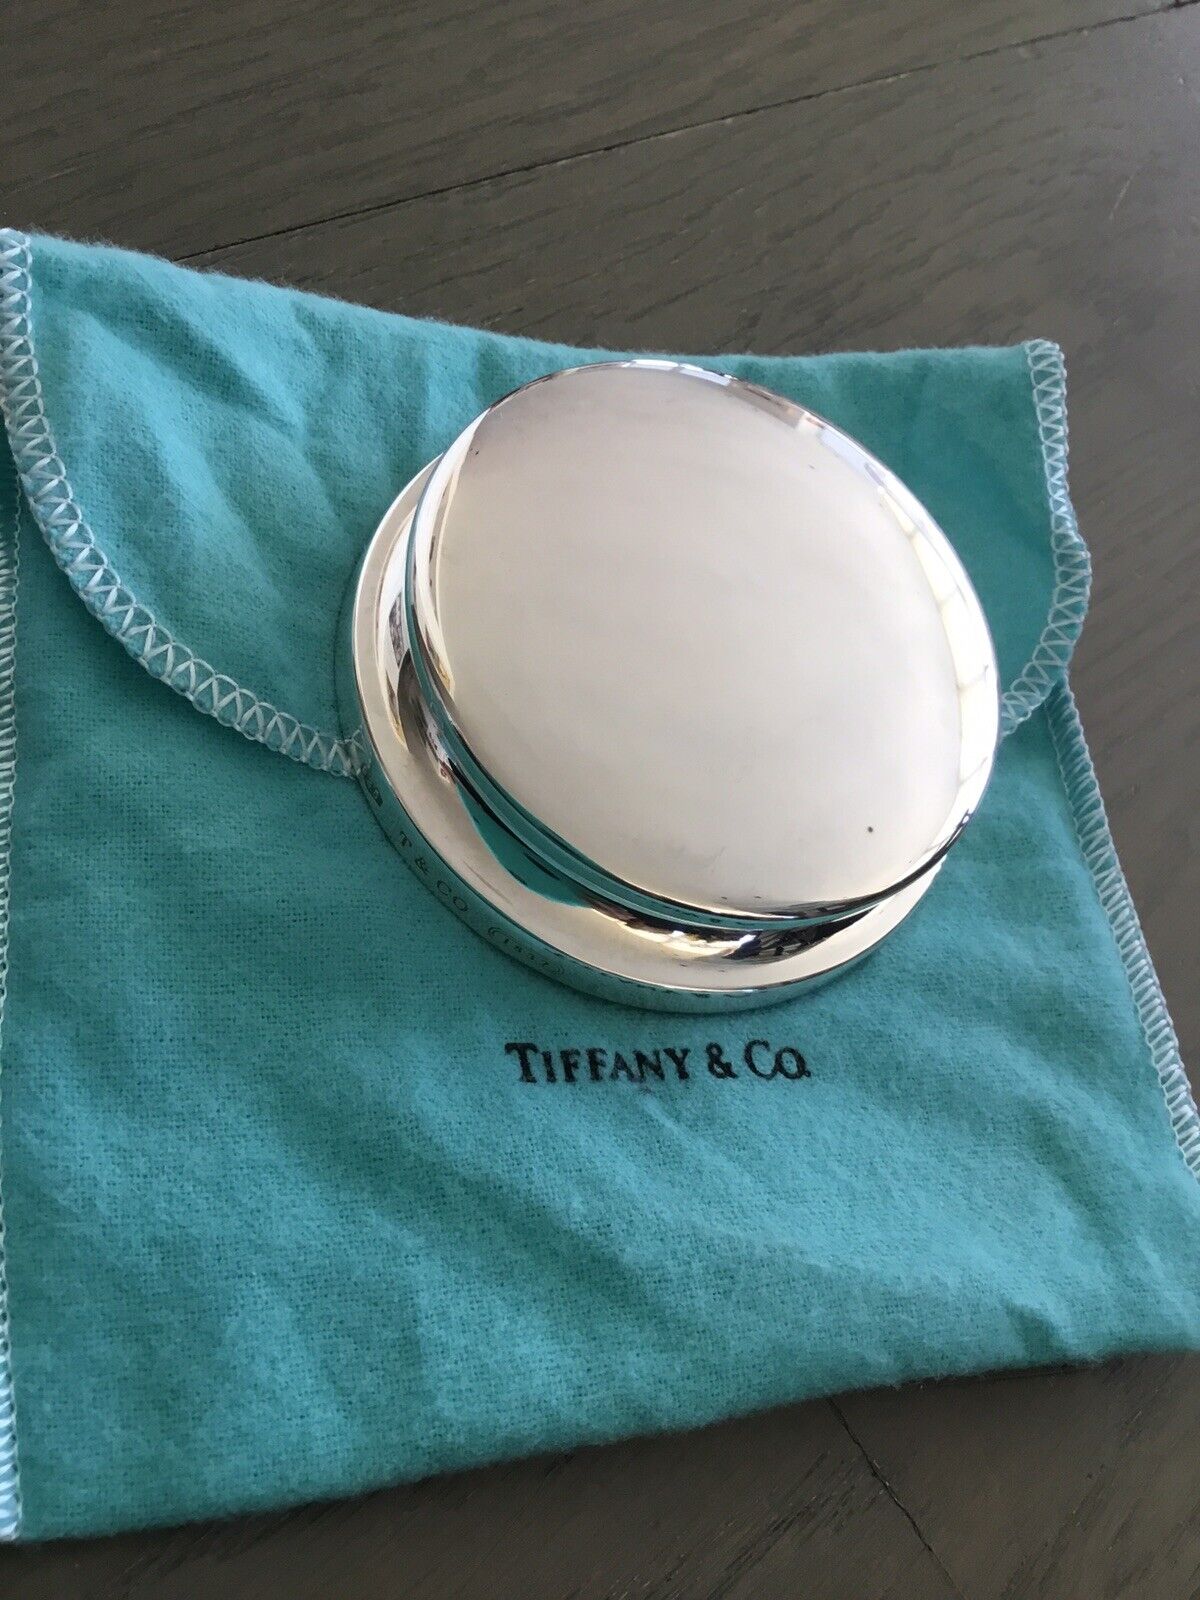 Tiffany & Co. Rare and Vintage 1999 .925 Sterling Silver Paperweight (1837)